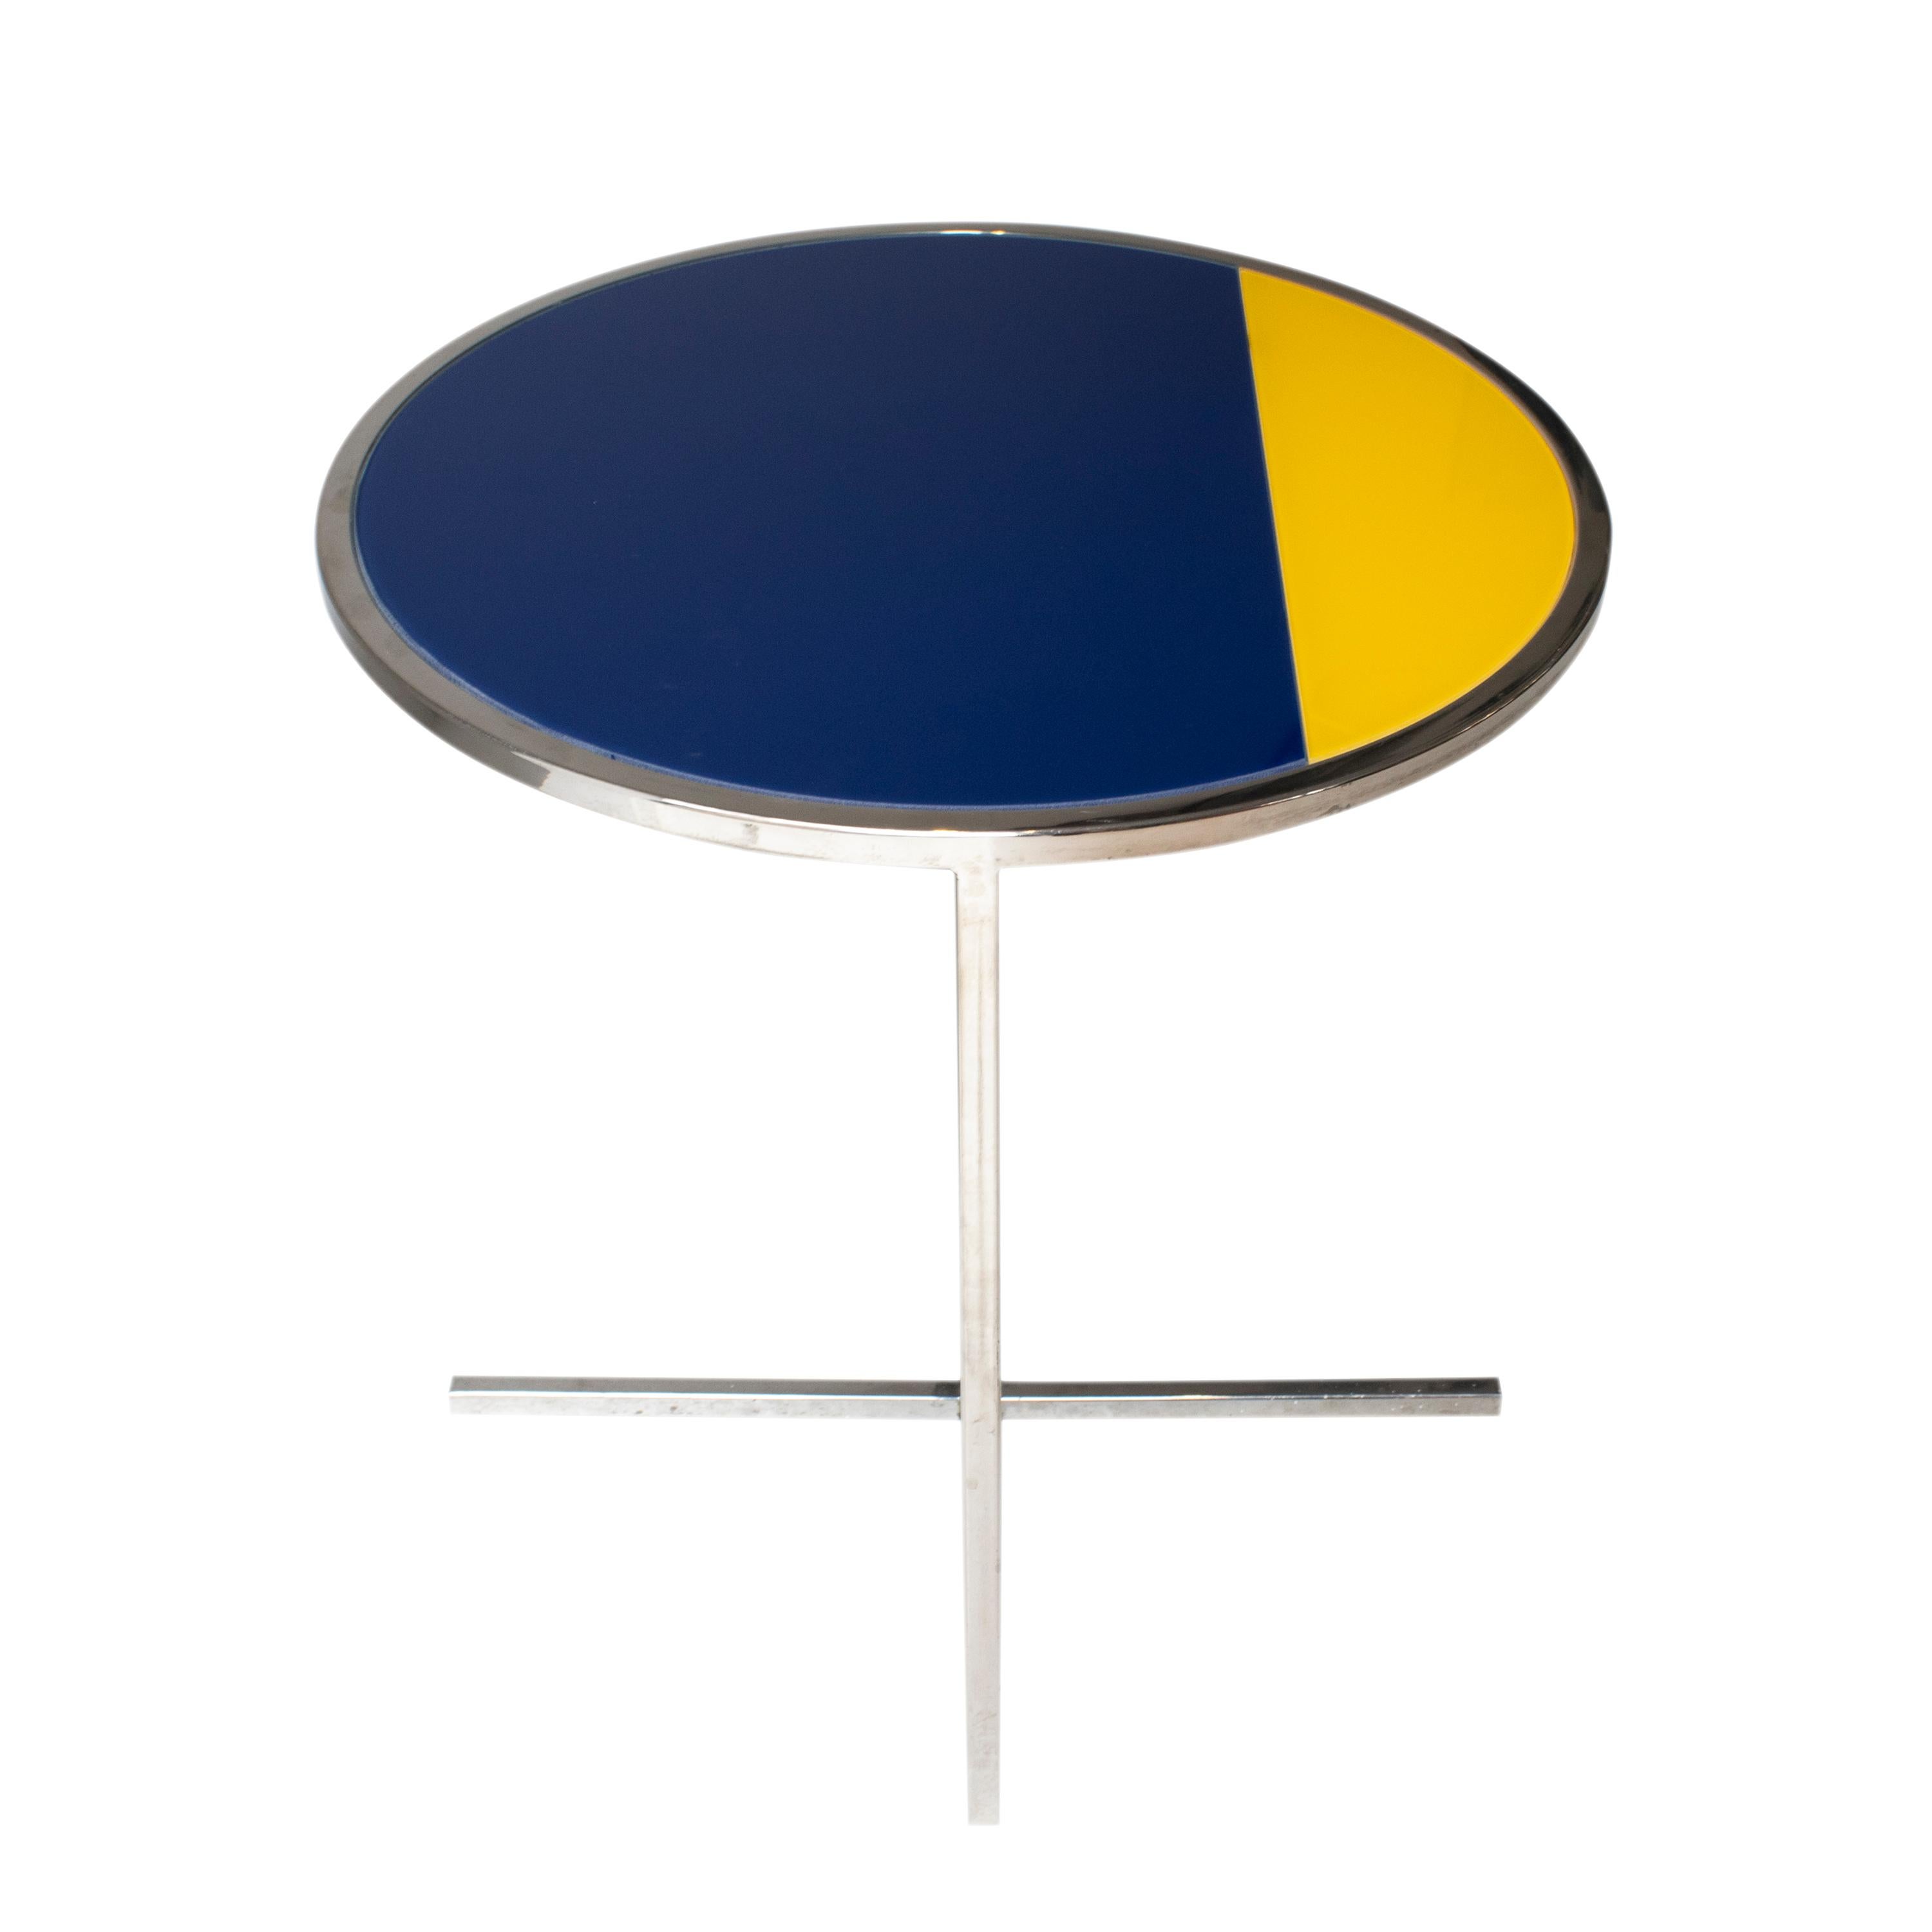 1970´s original side table with a chromed steel structure and an actual glass top designed by IKB191 in blue and yellow.